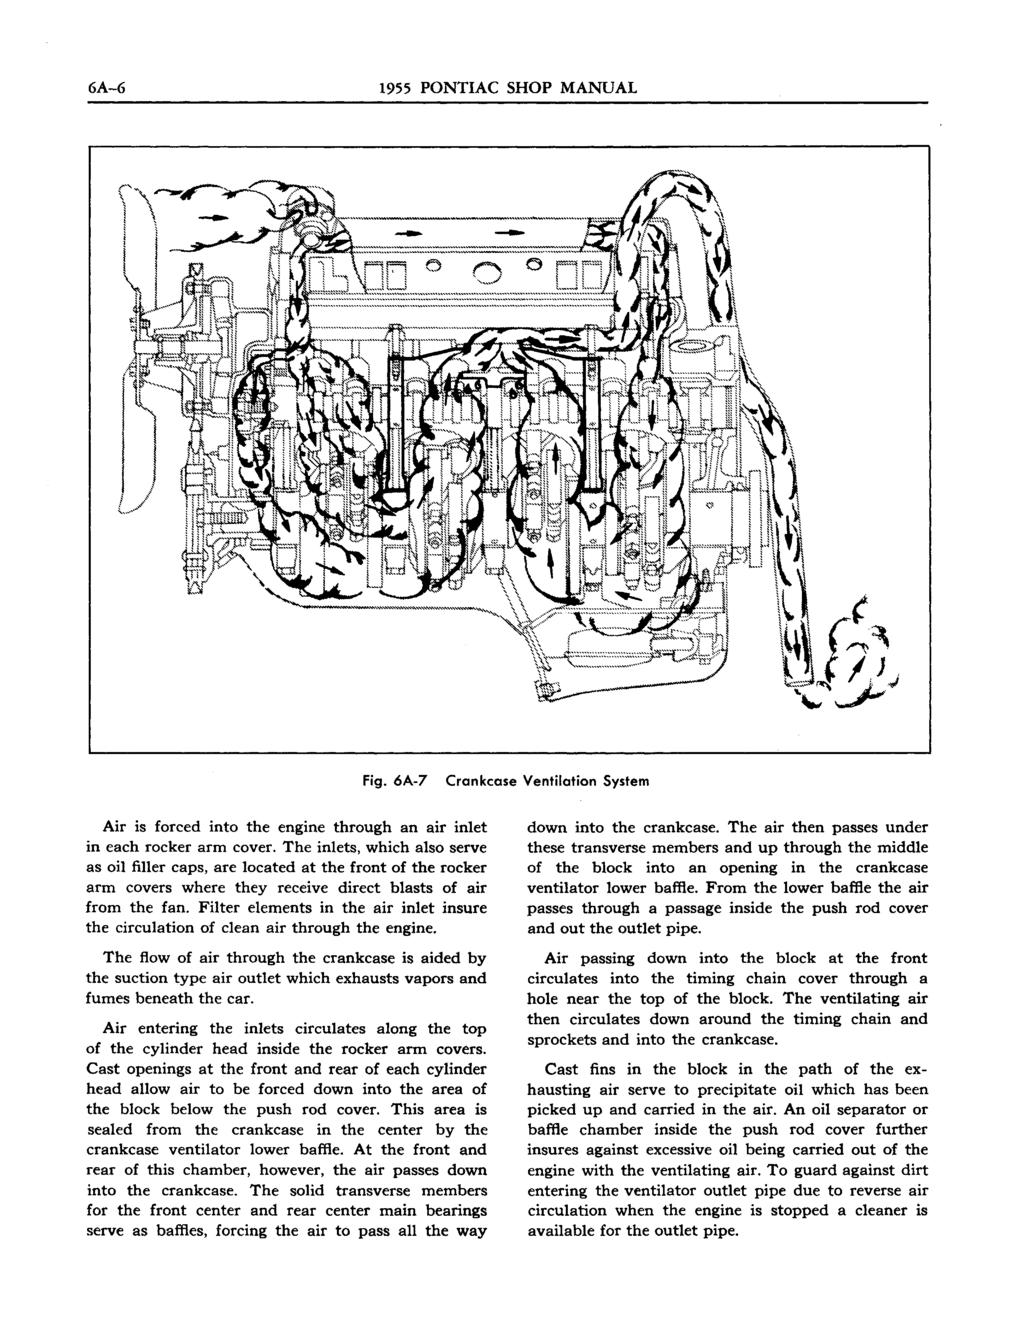 6A-6 1955 PONTIAC SHOP MANUAL Fig. 6A-7 Crankcase Ventilation System Air is forced into the engine through an air inlet in each rocker arm cover.